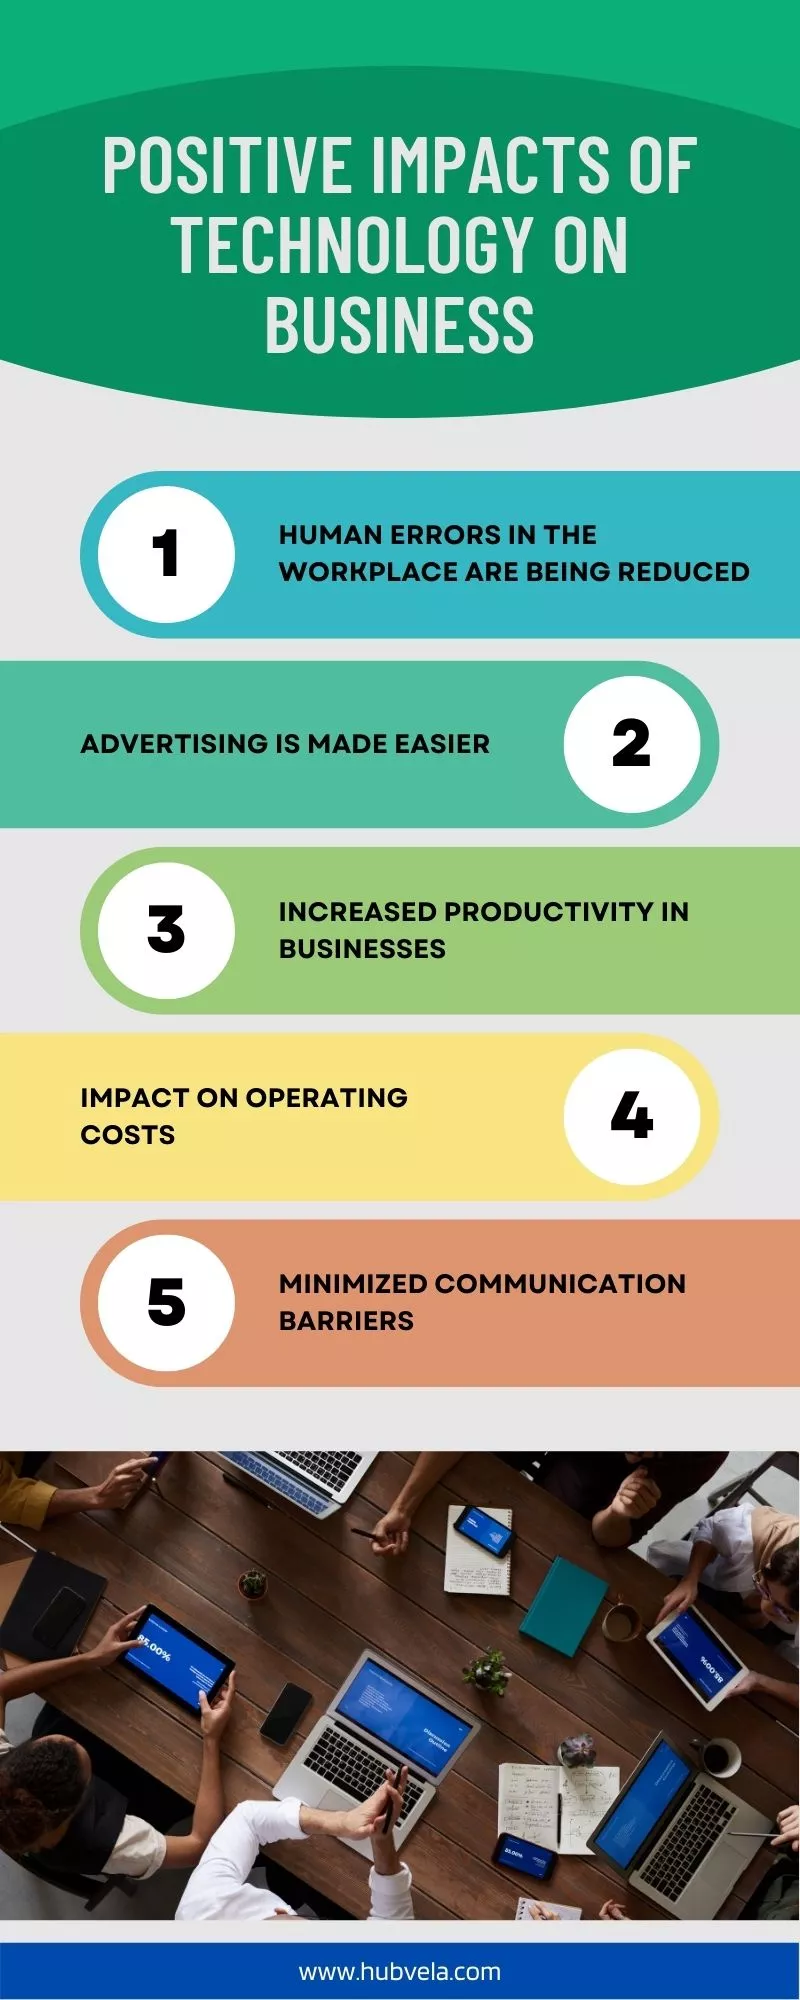 Positive Impacts of Technology on Business infographic